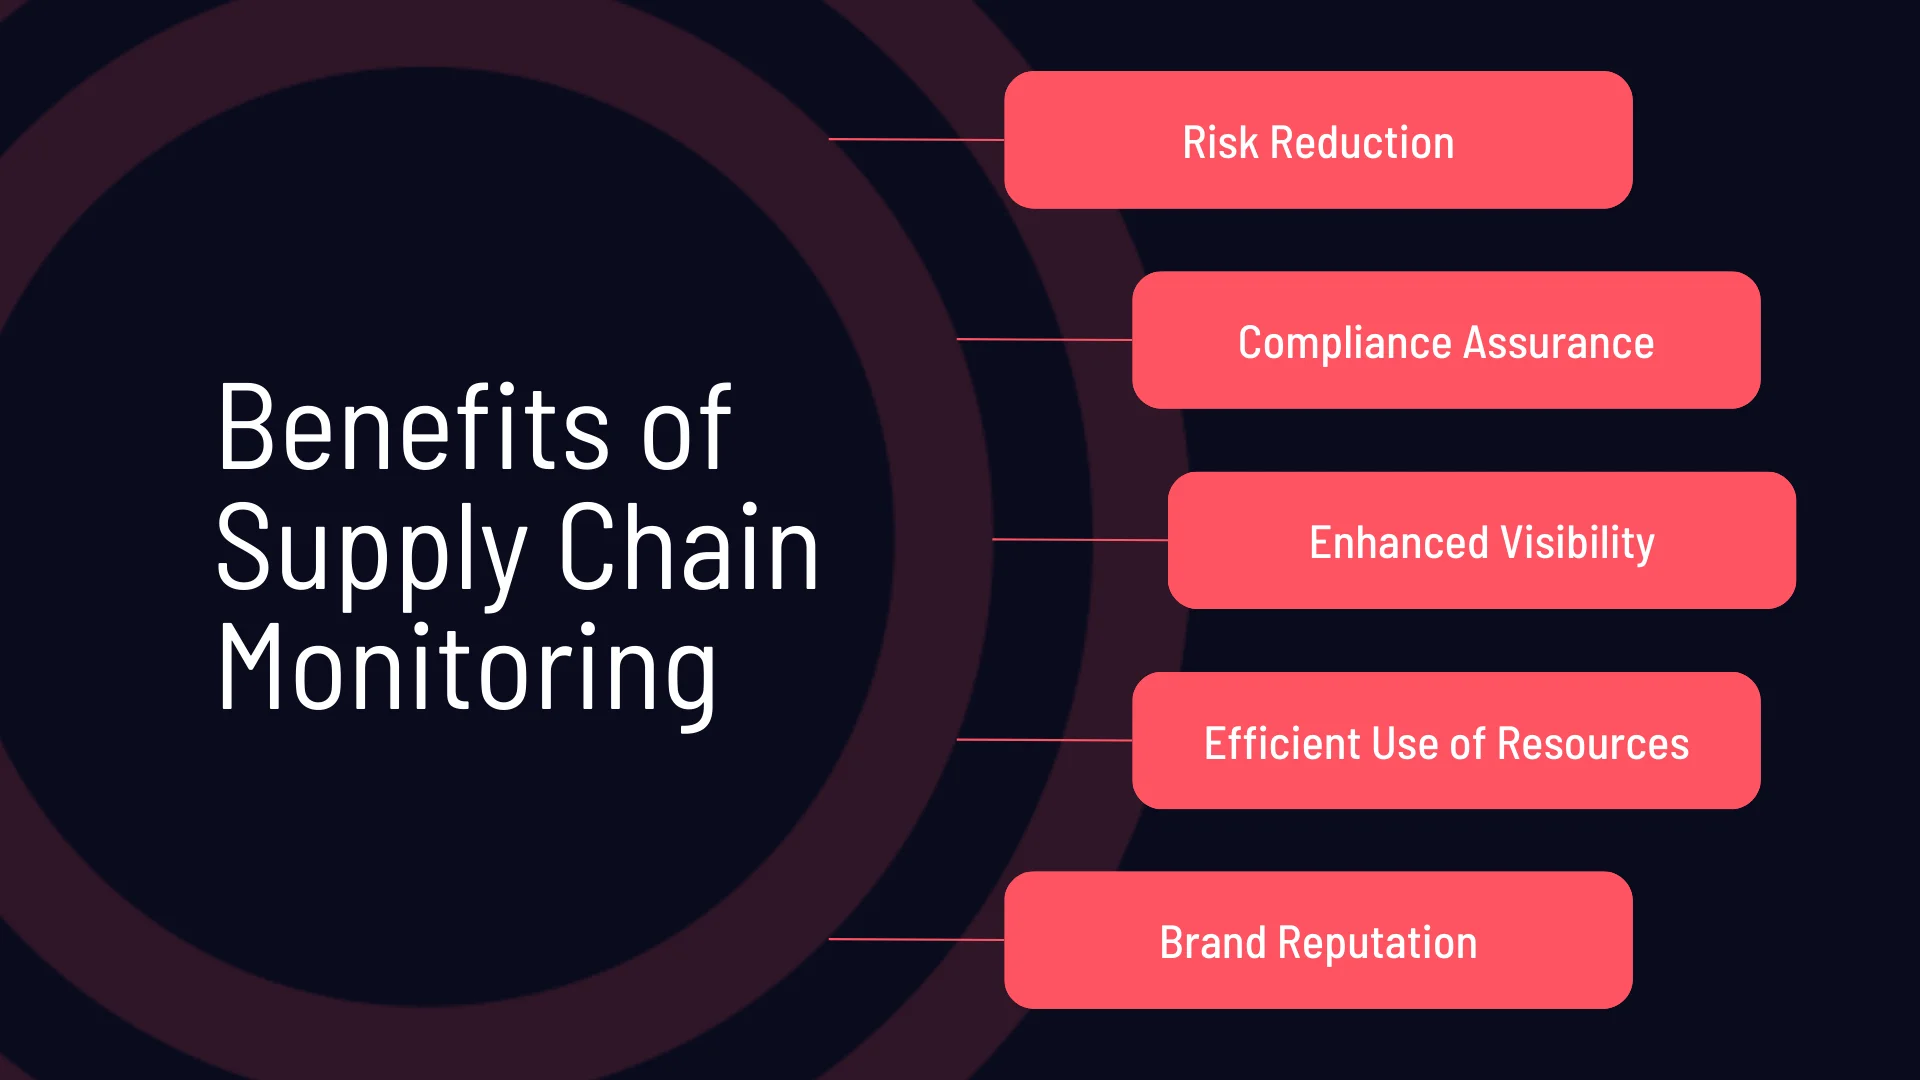 What are the benefits of supply chain monitoring platforms?